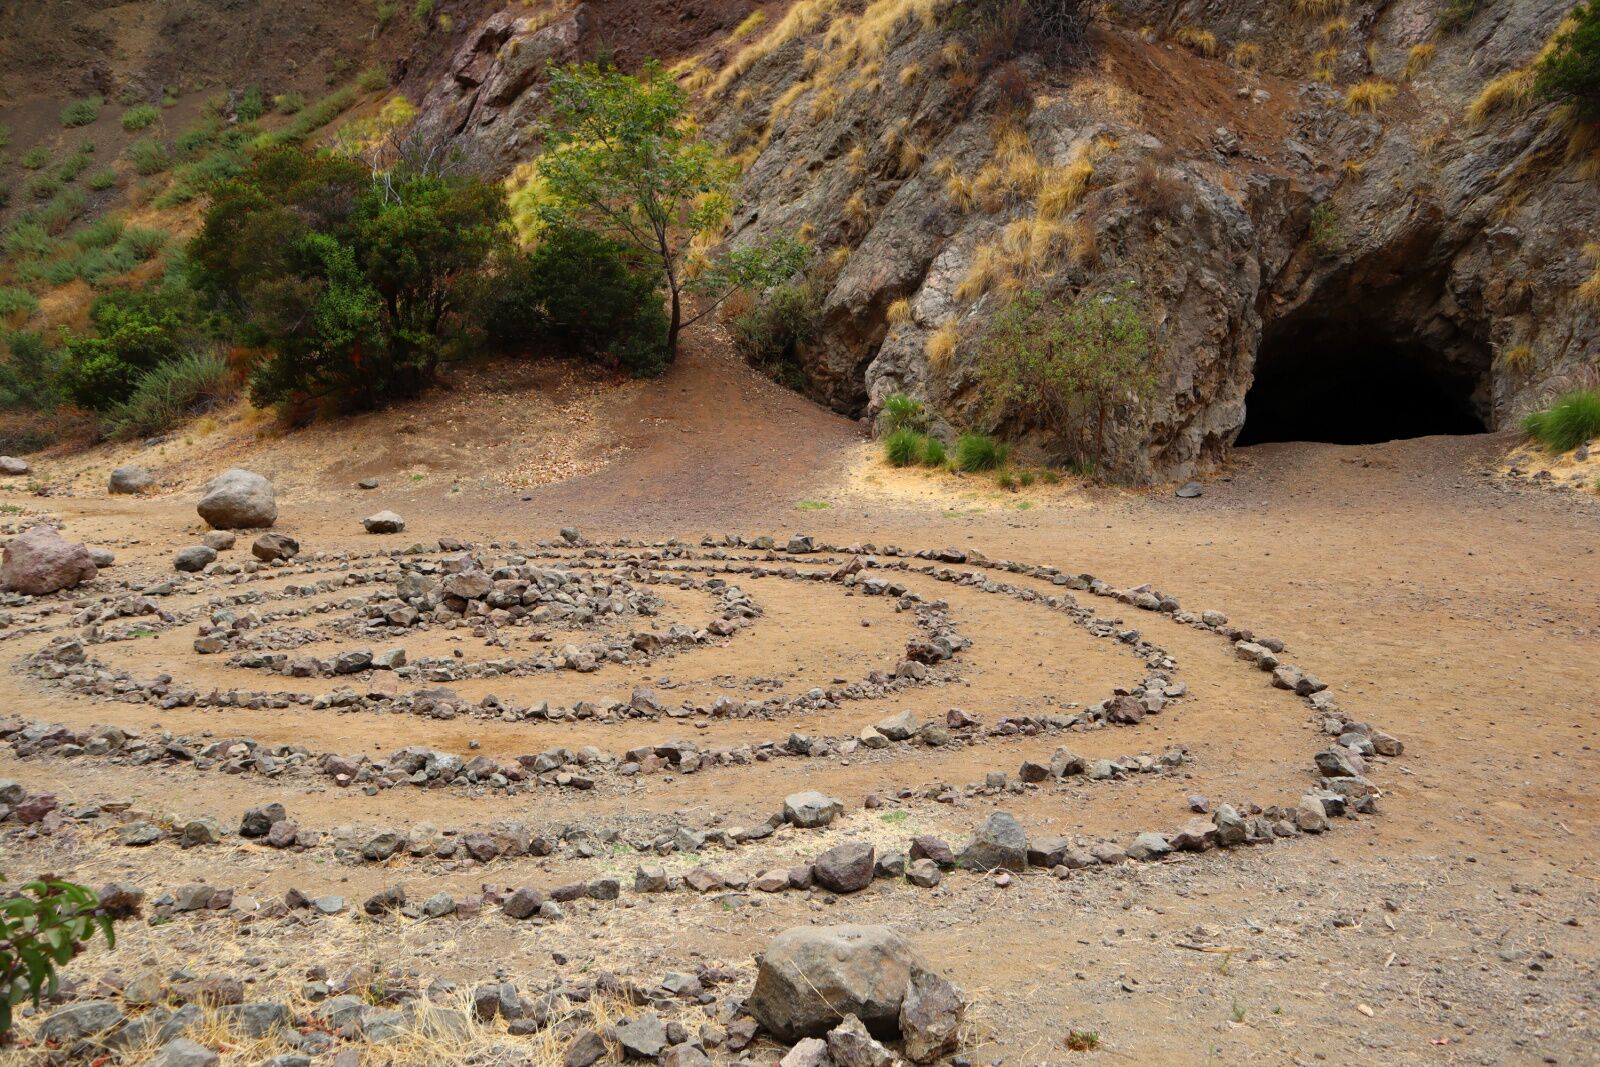 bronson caves in griffith park, one of the best parks in los angeles